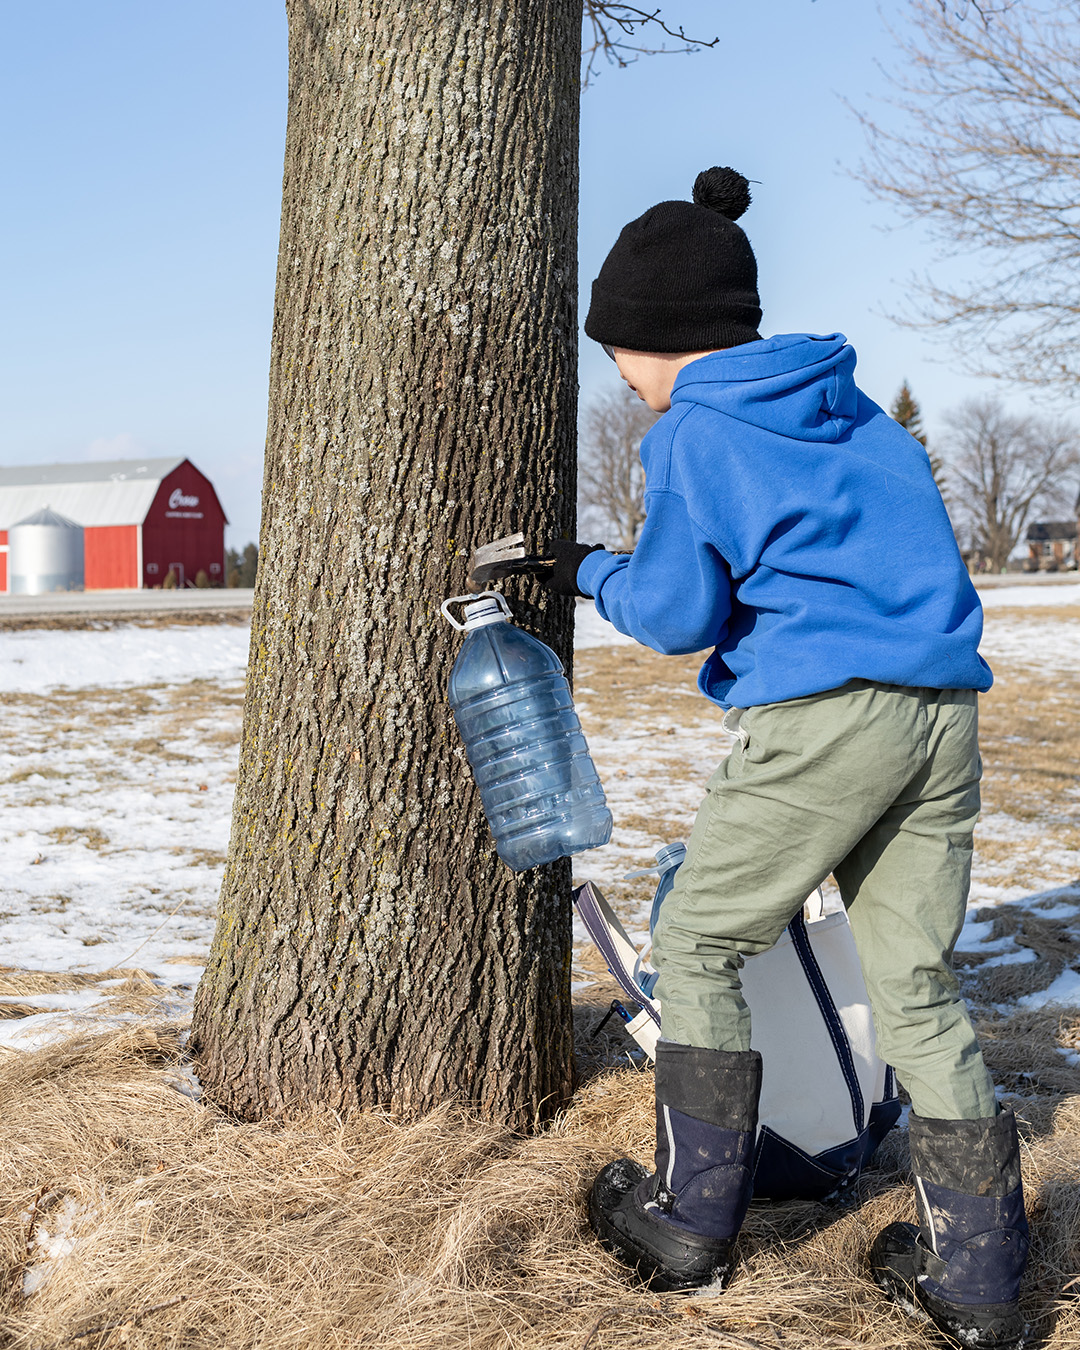 This is something we've done for quite a few years now and it's such a fun and rewarding early spring activity. If you'd like to try it too, here's how to harvest maple syrup from your maple trees!